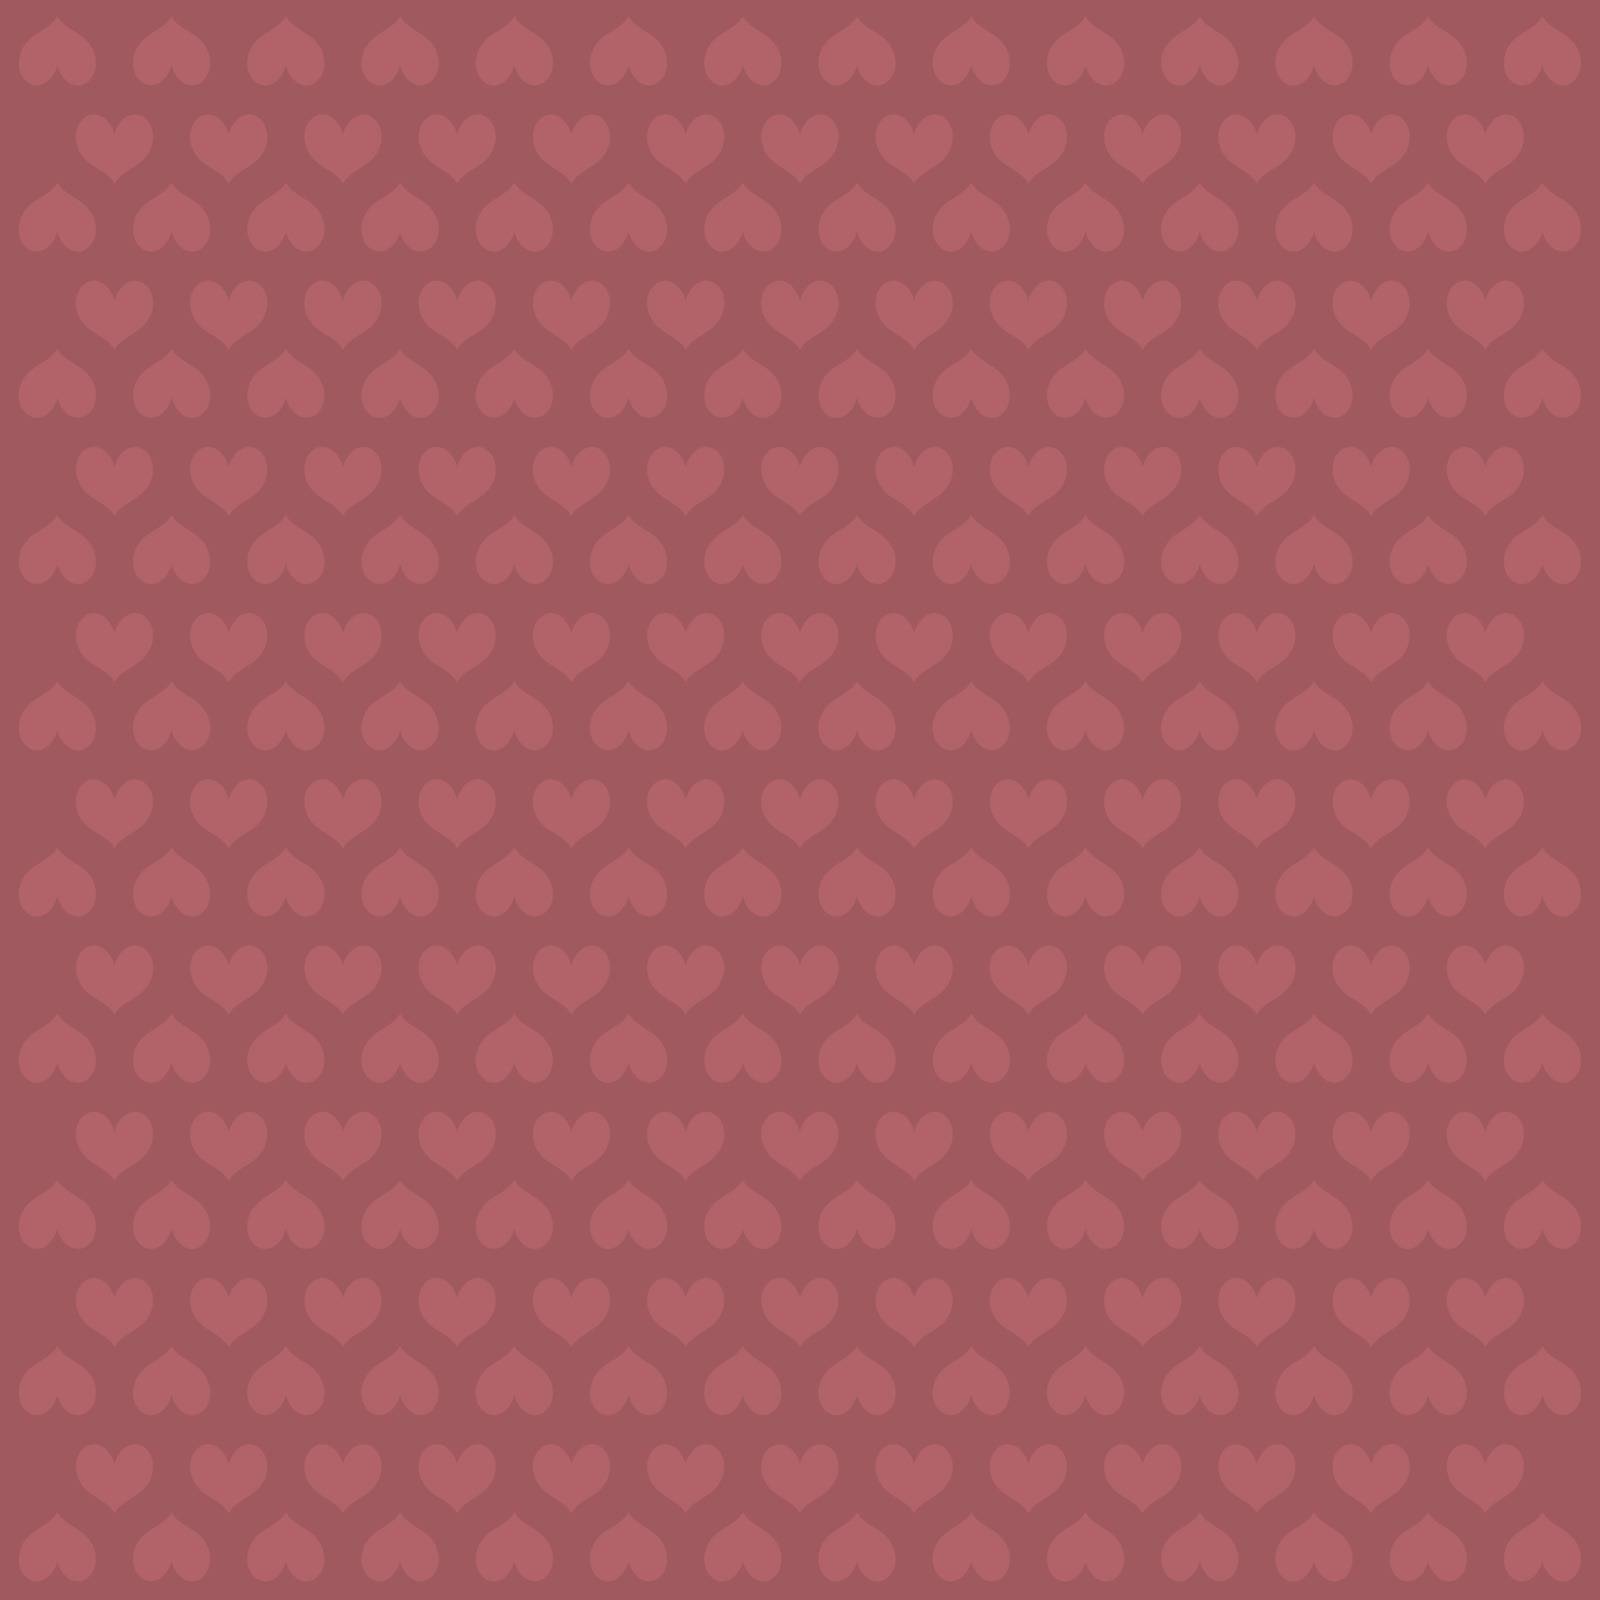 valentine vector pattern background made of pink hearts shapes